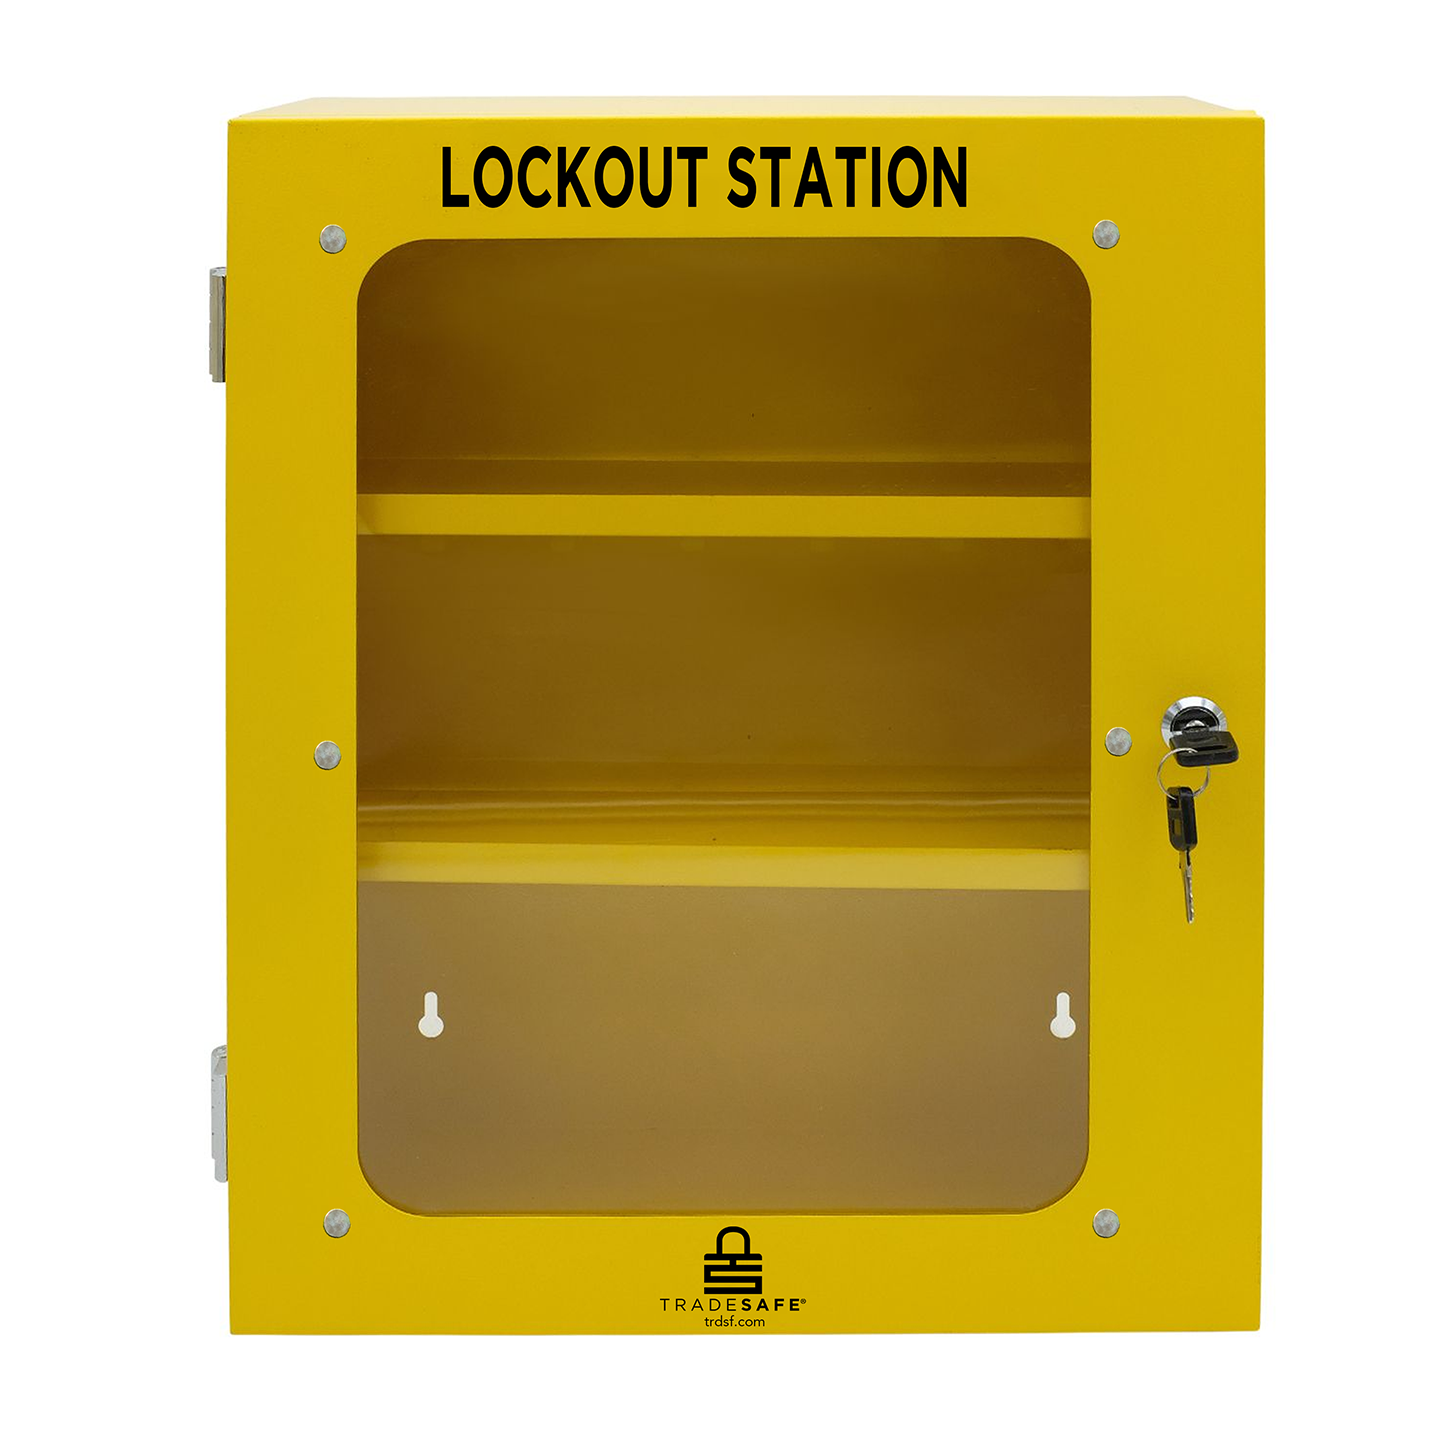 Lockout Tagout Station Cabinet - LOTO Devices Not Included